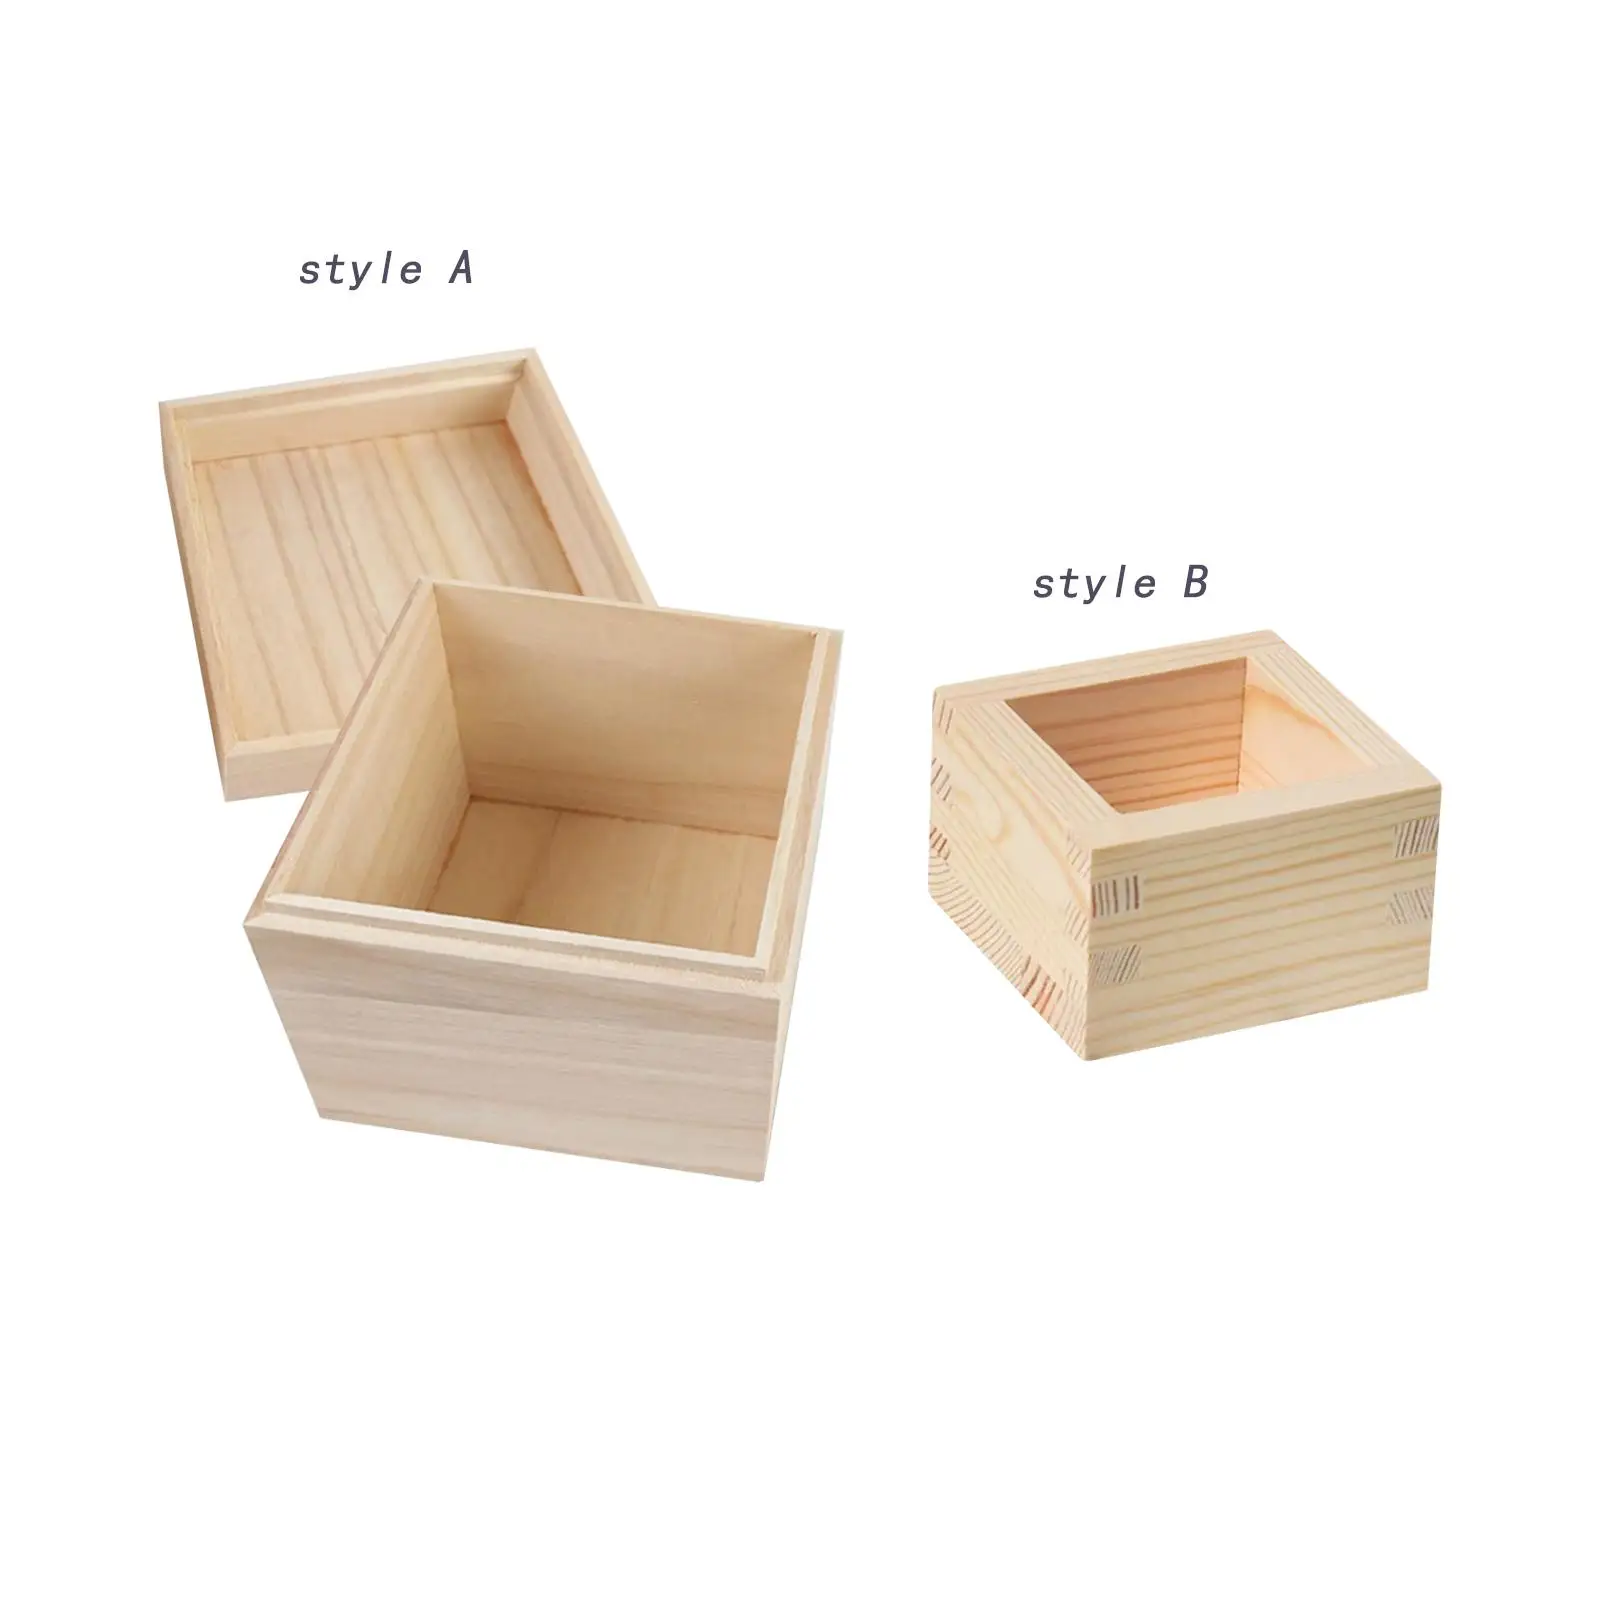 Wooden Craft Storage Organiser Boxes, Wooden Box Crate, Unfinished Mini Wooden Boxes Square,